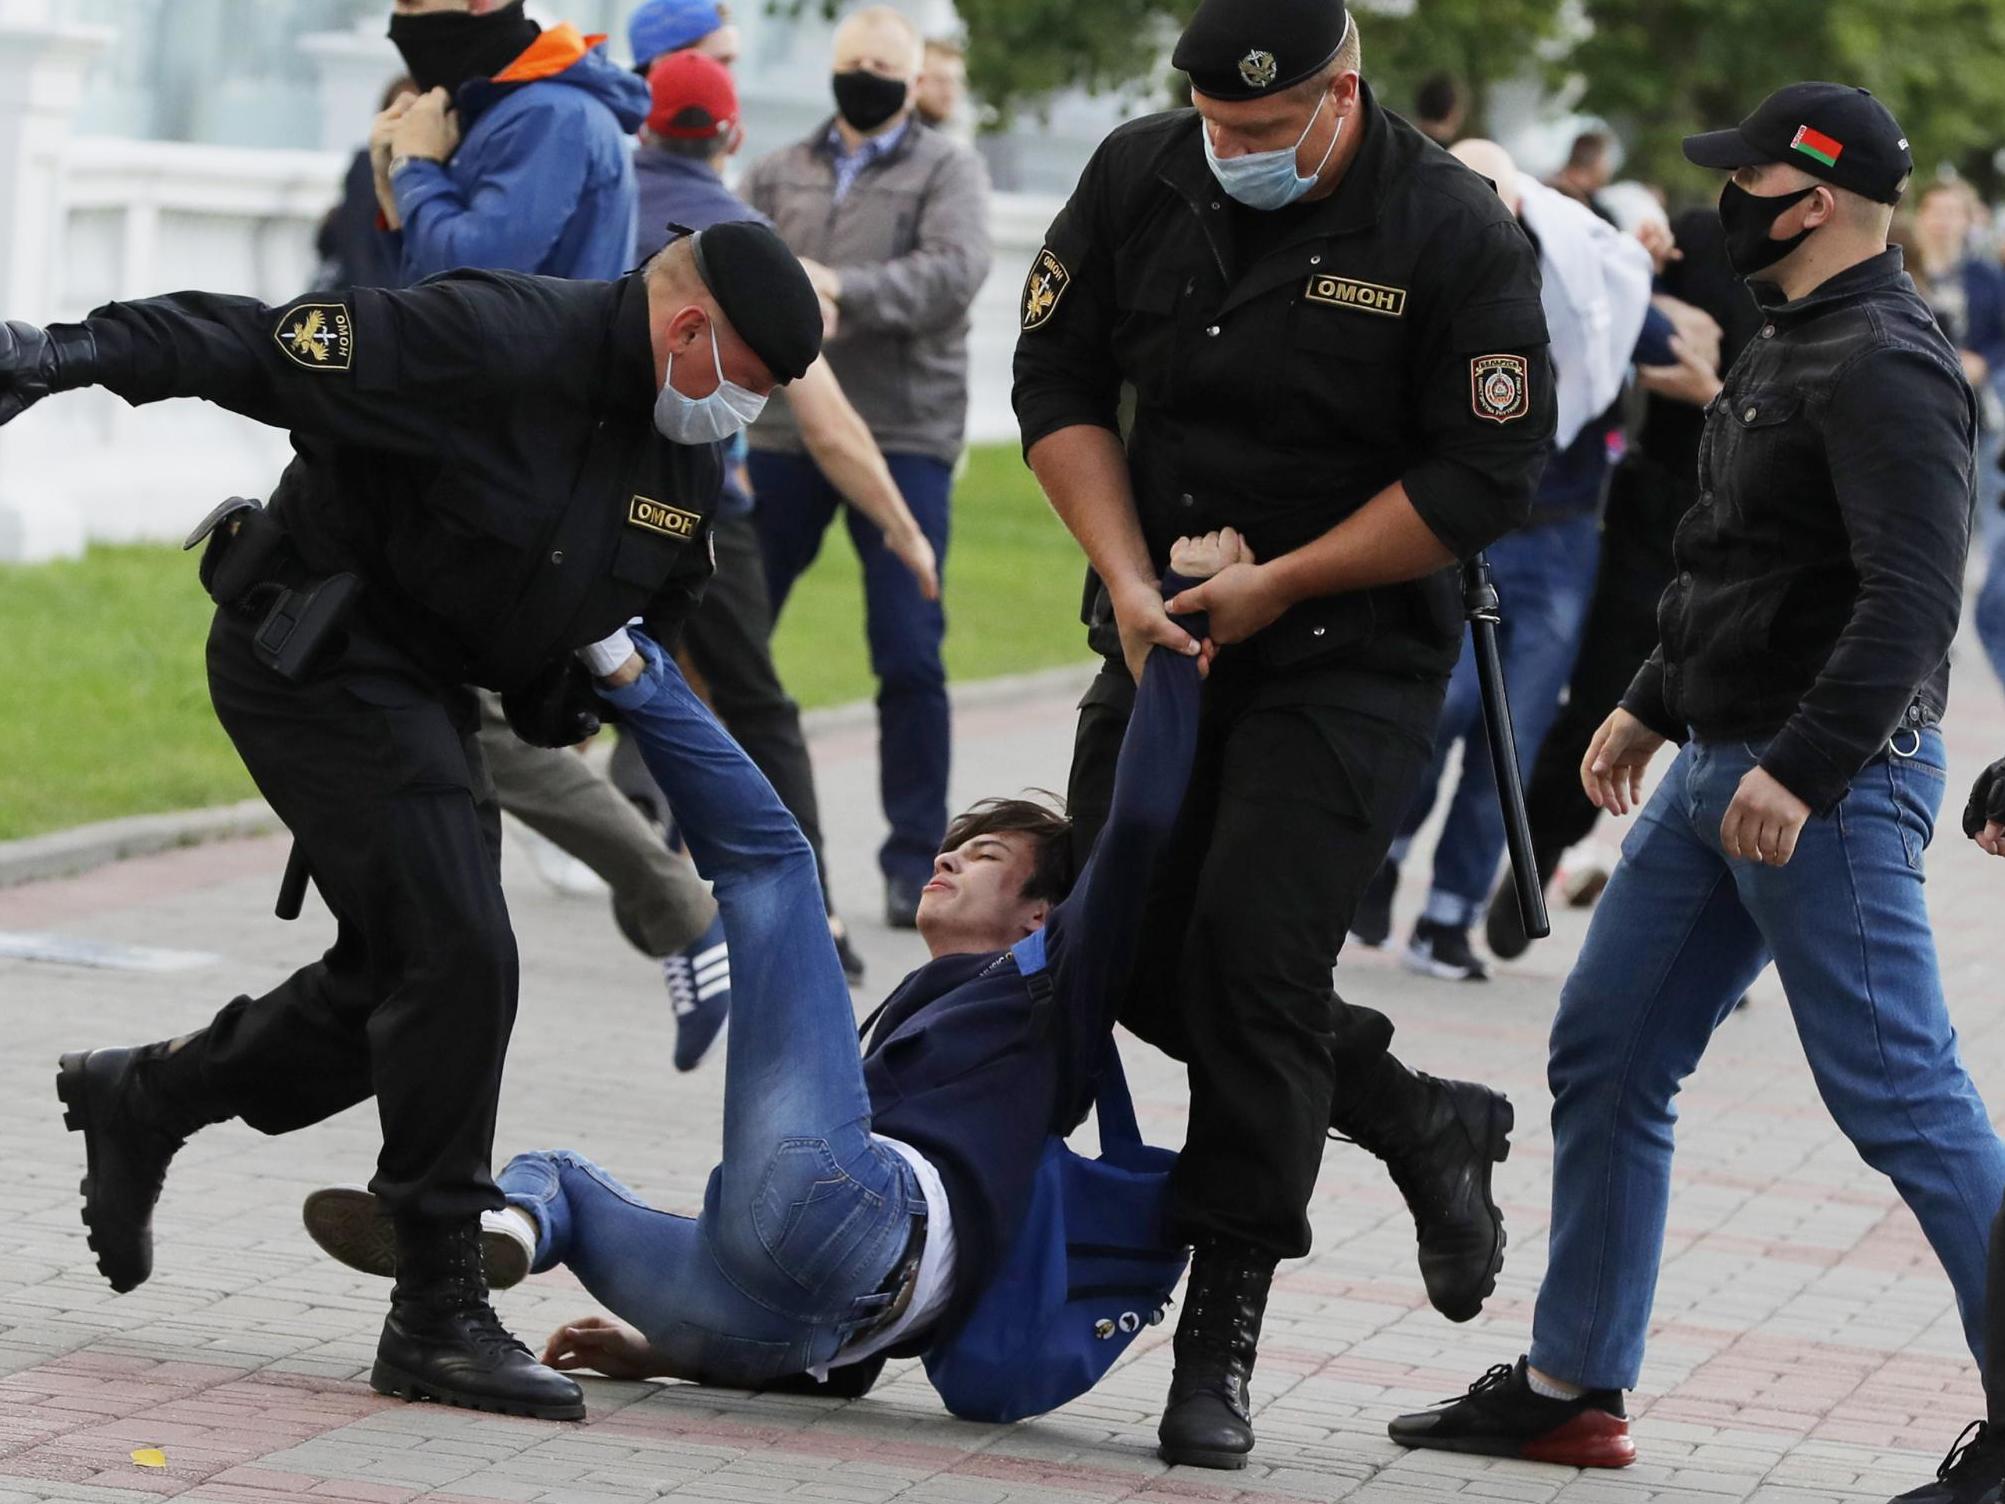 Minsk police detain a protester during a rally against the removal of opposition candidates from the presidential elections